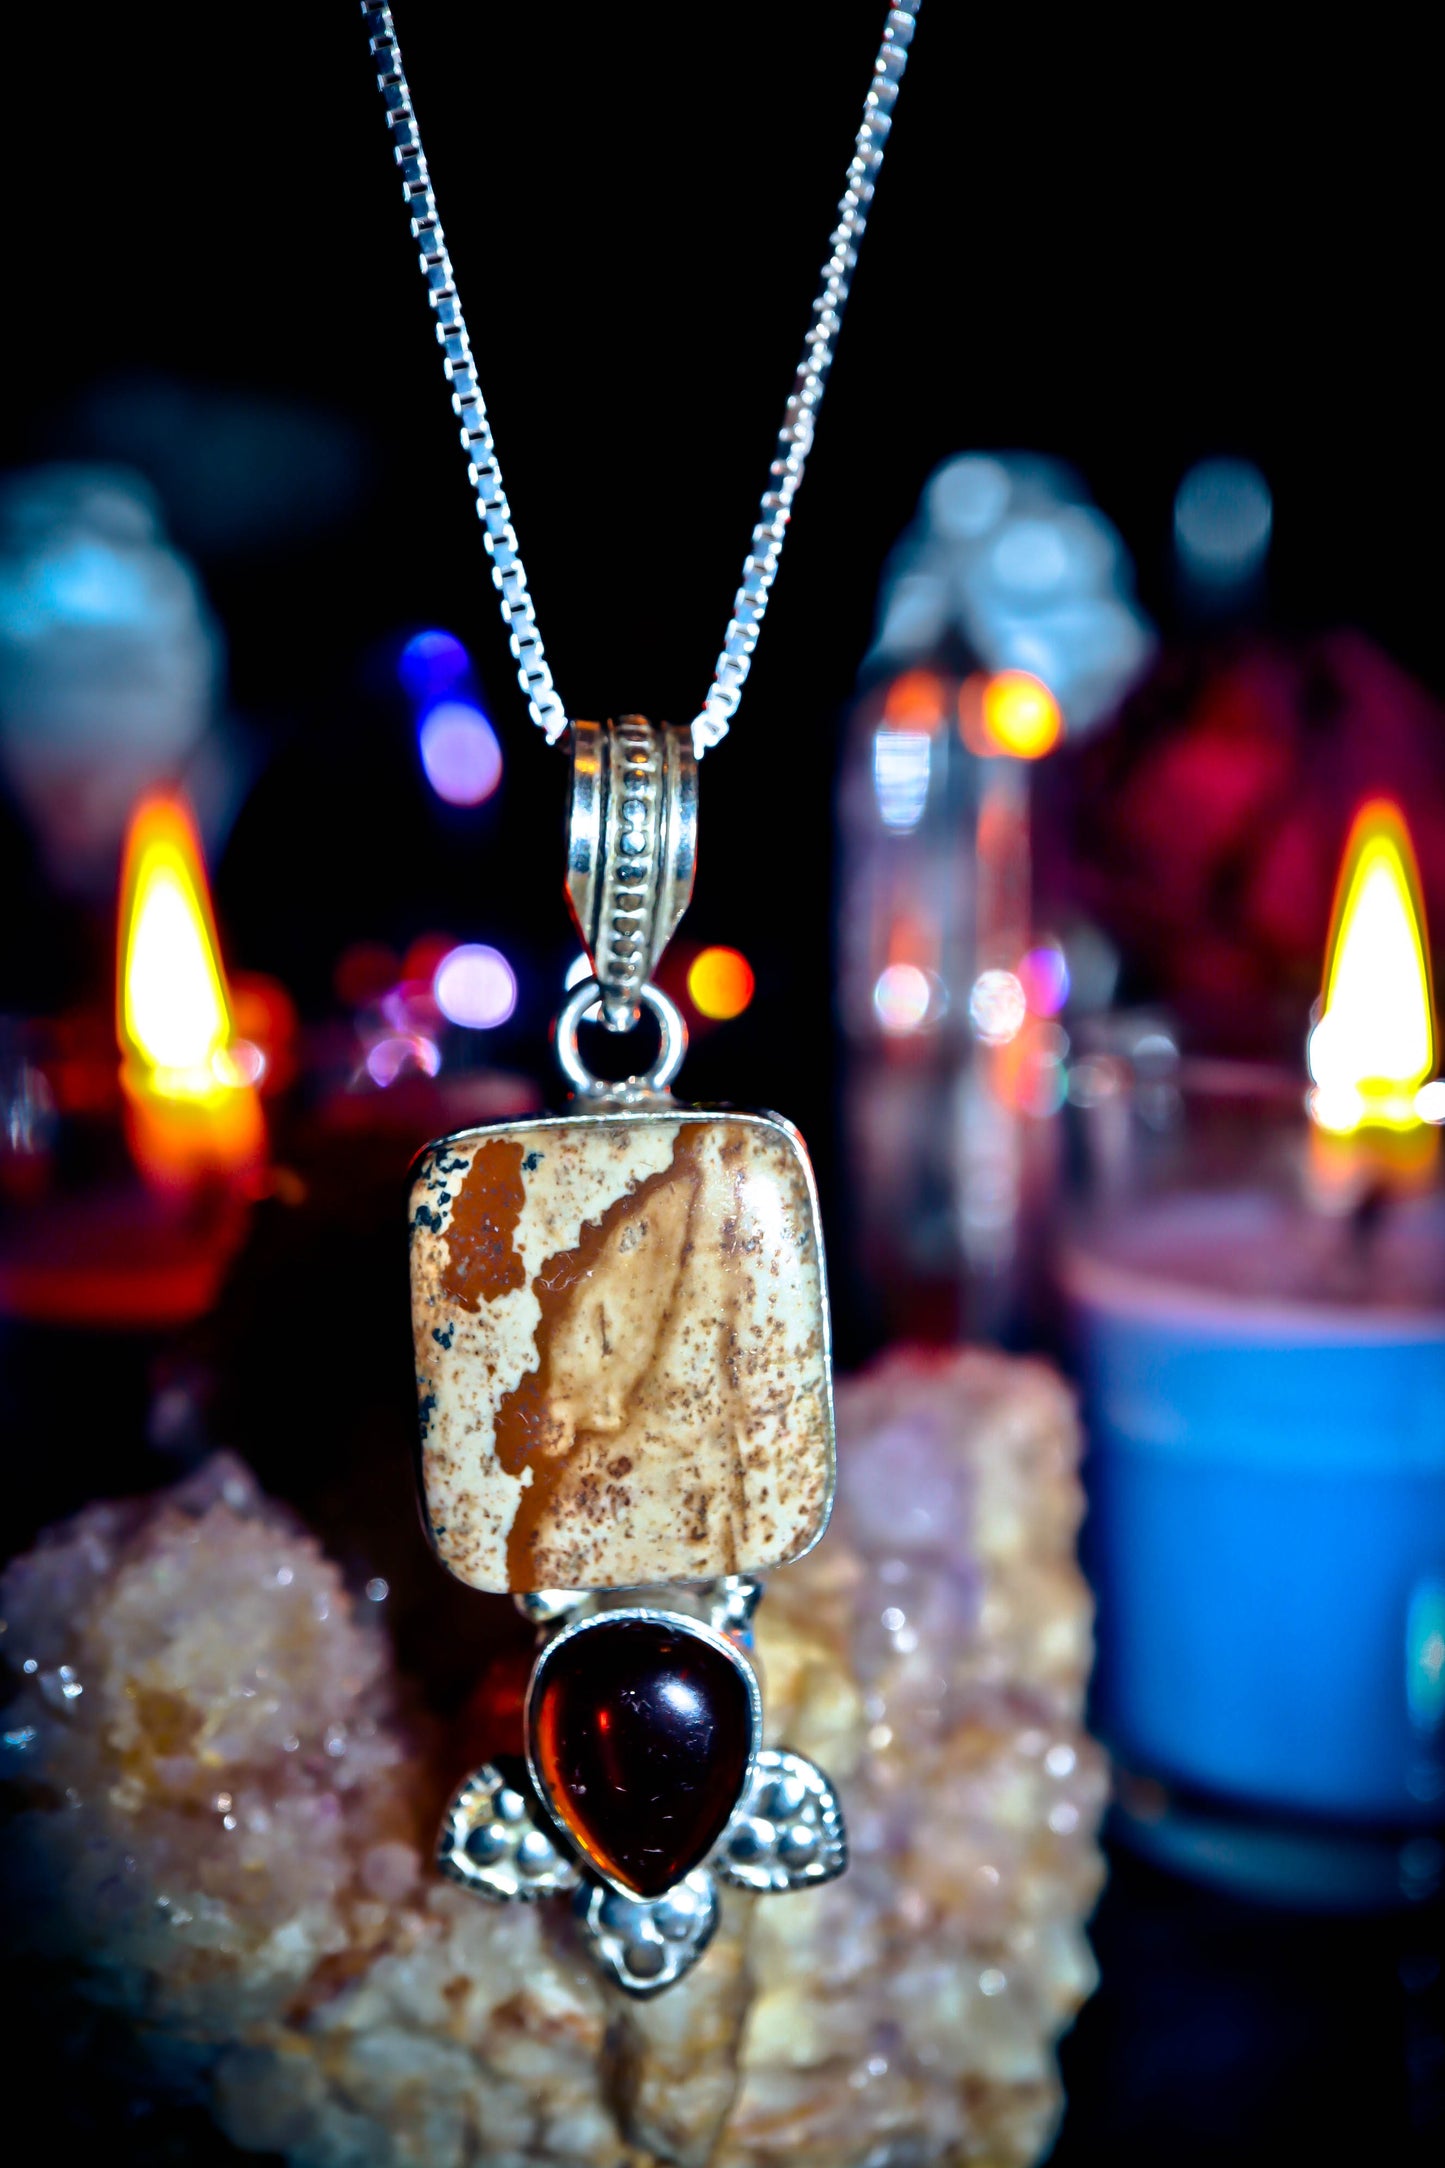 ** MAGICK ** SHAPESHIFTING Metamorphosis Genie Amulet! Change Your Shape! Ancient Occult Rituals & Transformation Spells! $$$ Powerful Haunted Djinn Vessel! * Sterling Silver!